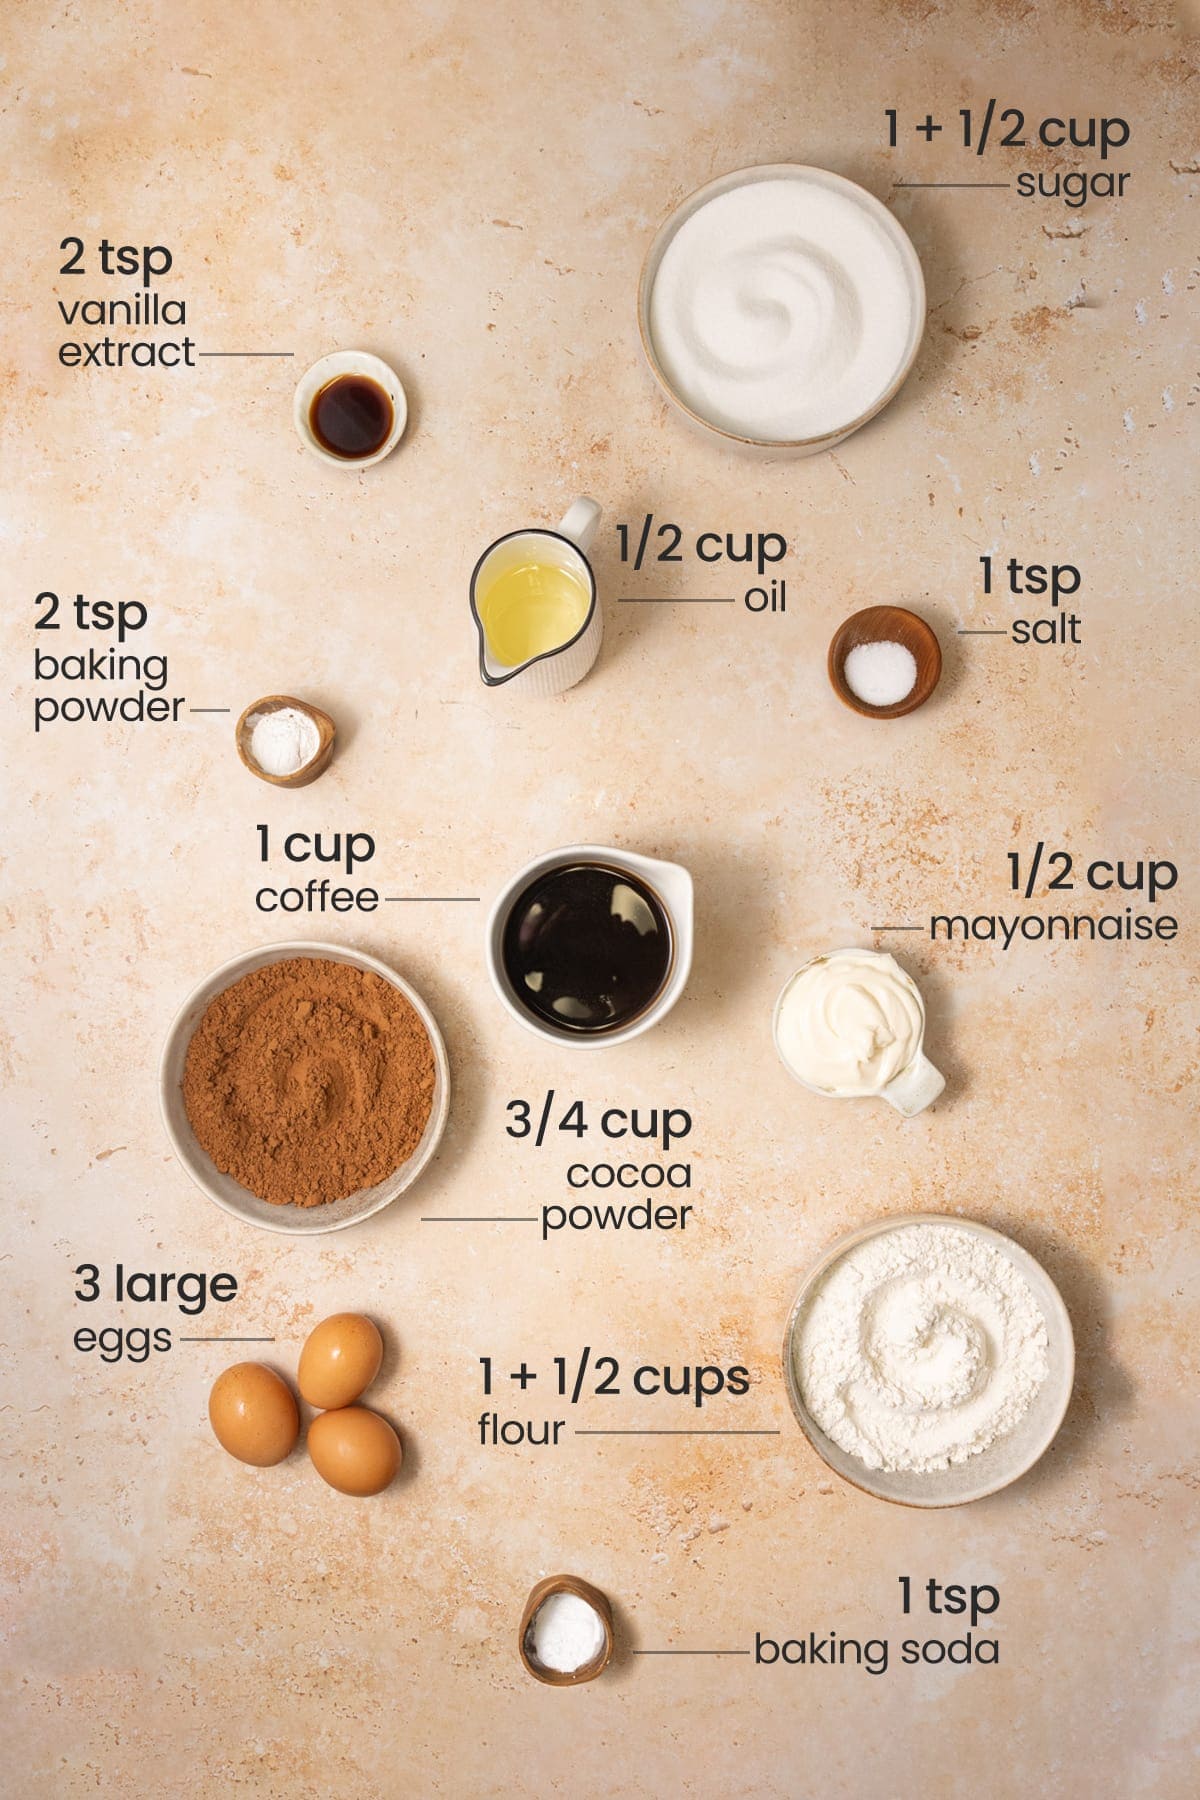 All ingredients needed for chocolate cupcakes with chocolate ganache including sugar, vanilla extract, oil, salt, mayonnaise, coffee, cocoa powder, eggs, flour, baking powder, and baking soda. 